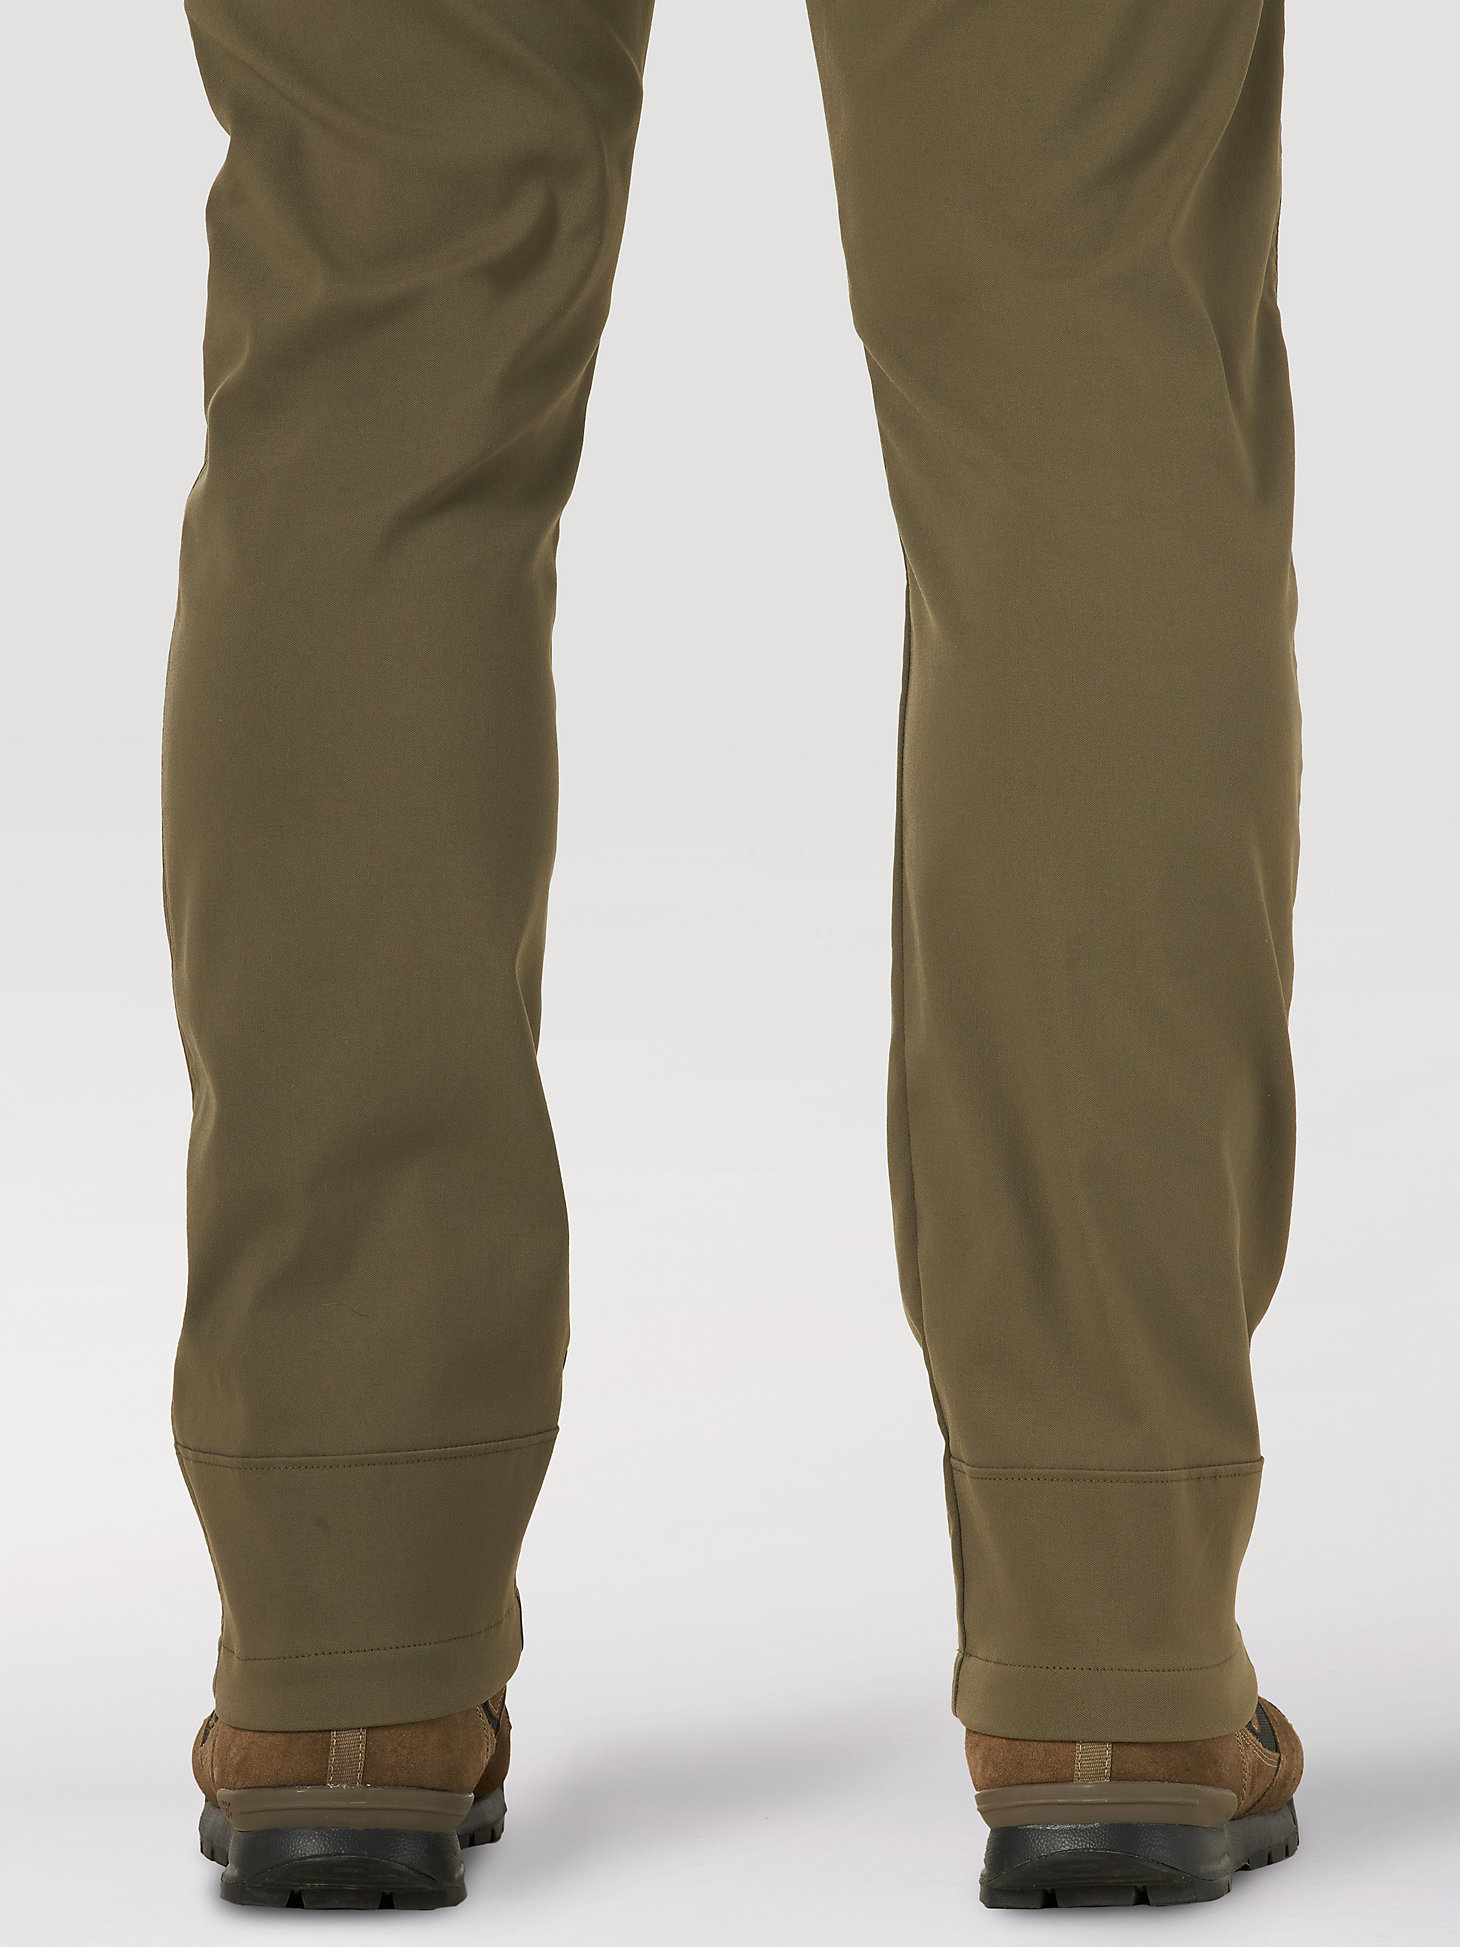 ATG by Wrangler™ Men's Synthetic Utility Pant in Sea Turtle alternative view 8